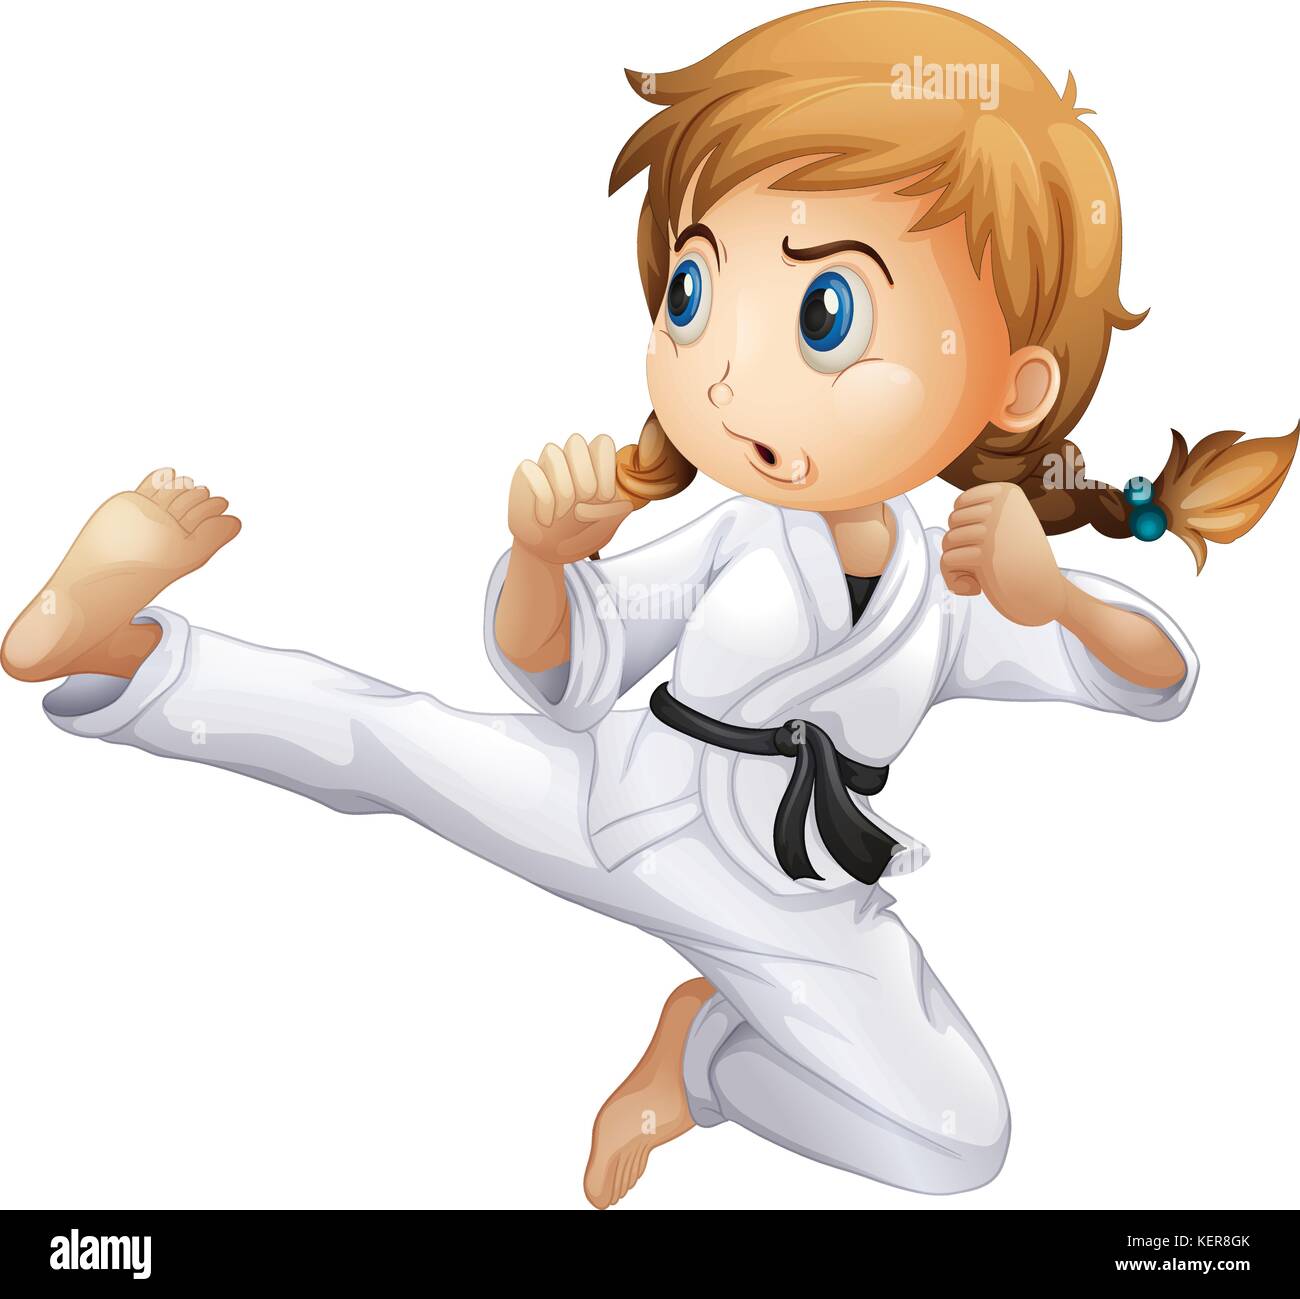 Illustration of a female doing karate on a white background Stock Vector